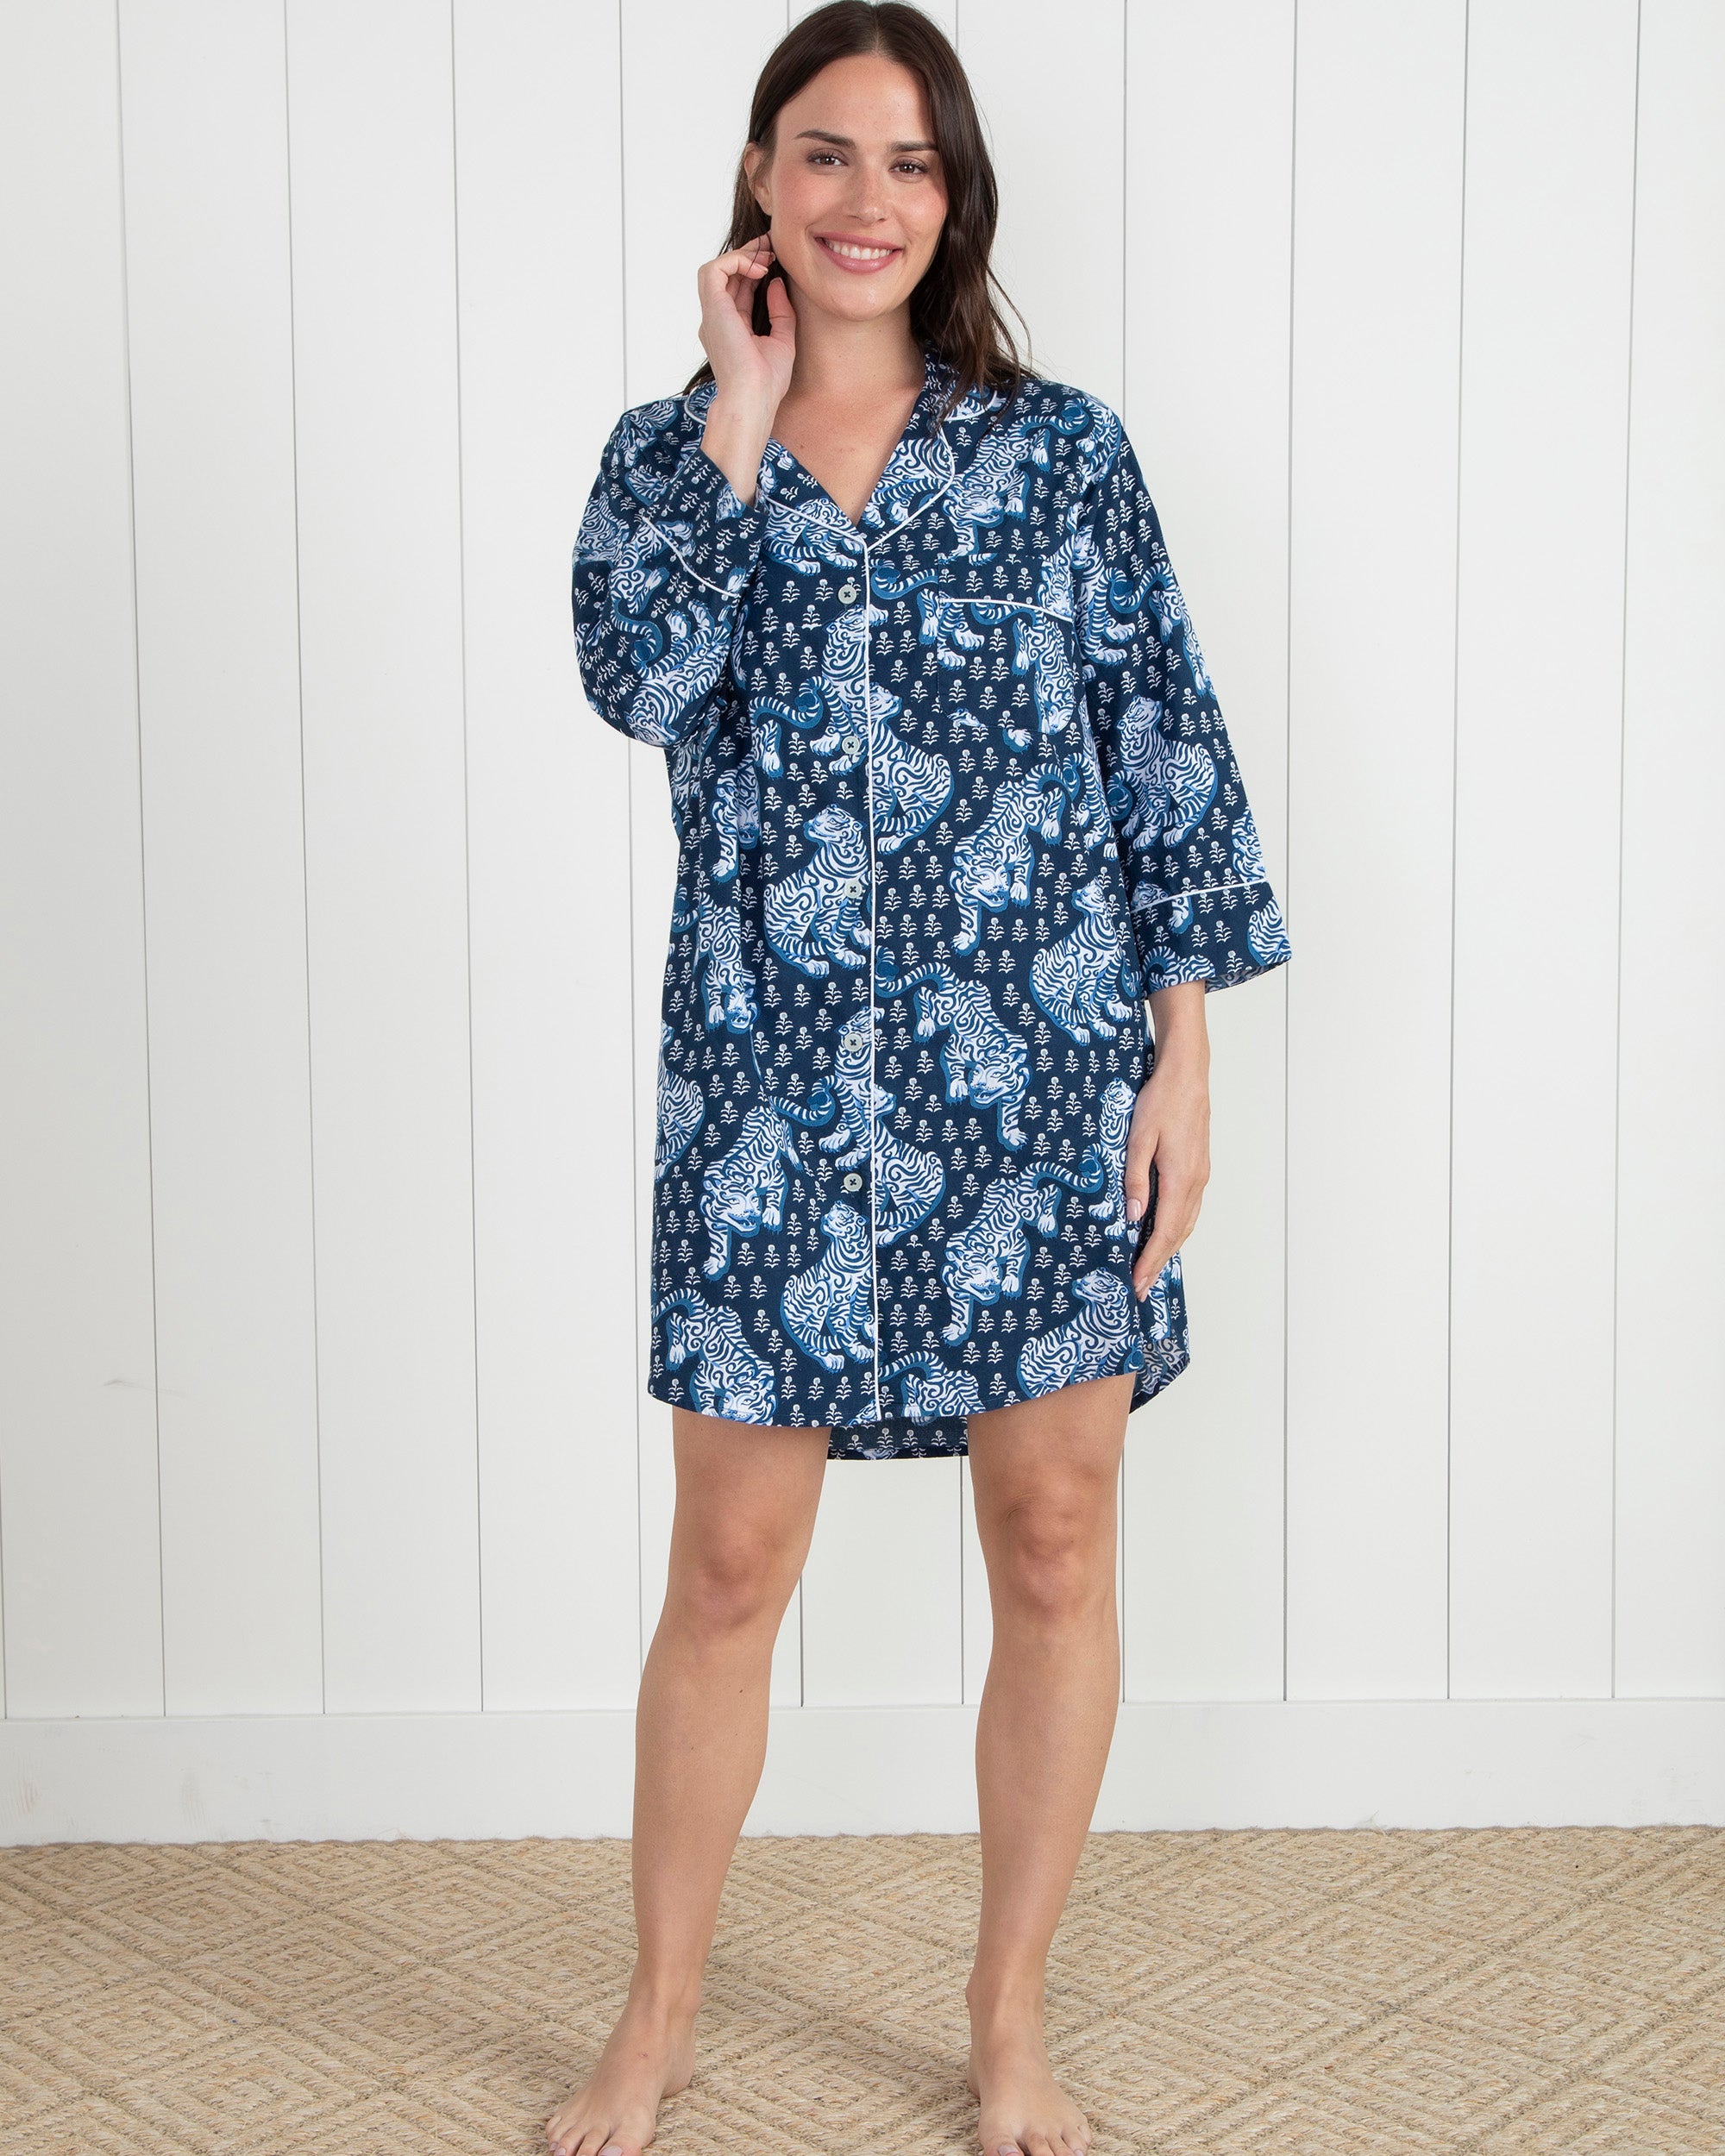 Tiger Queen - Back to Bed Nightgown - Navy